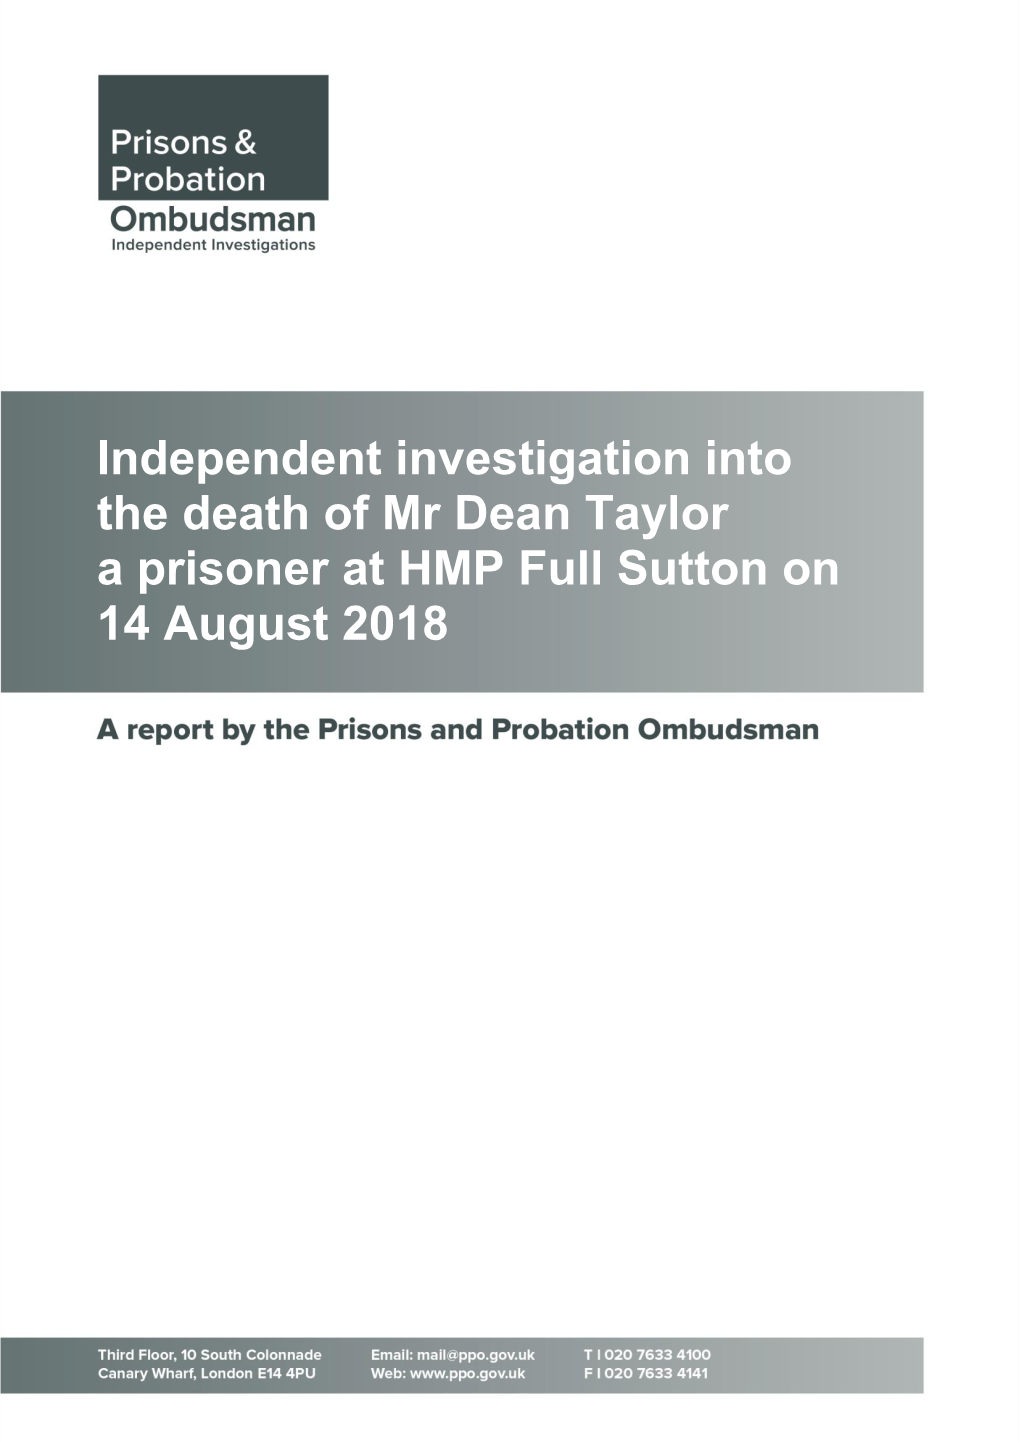 Independent Investigation Into the Death of Mr Dean Taylor a Prisoner at HMP Full Sutton on 14 August 2018